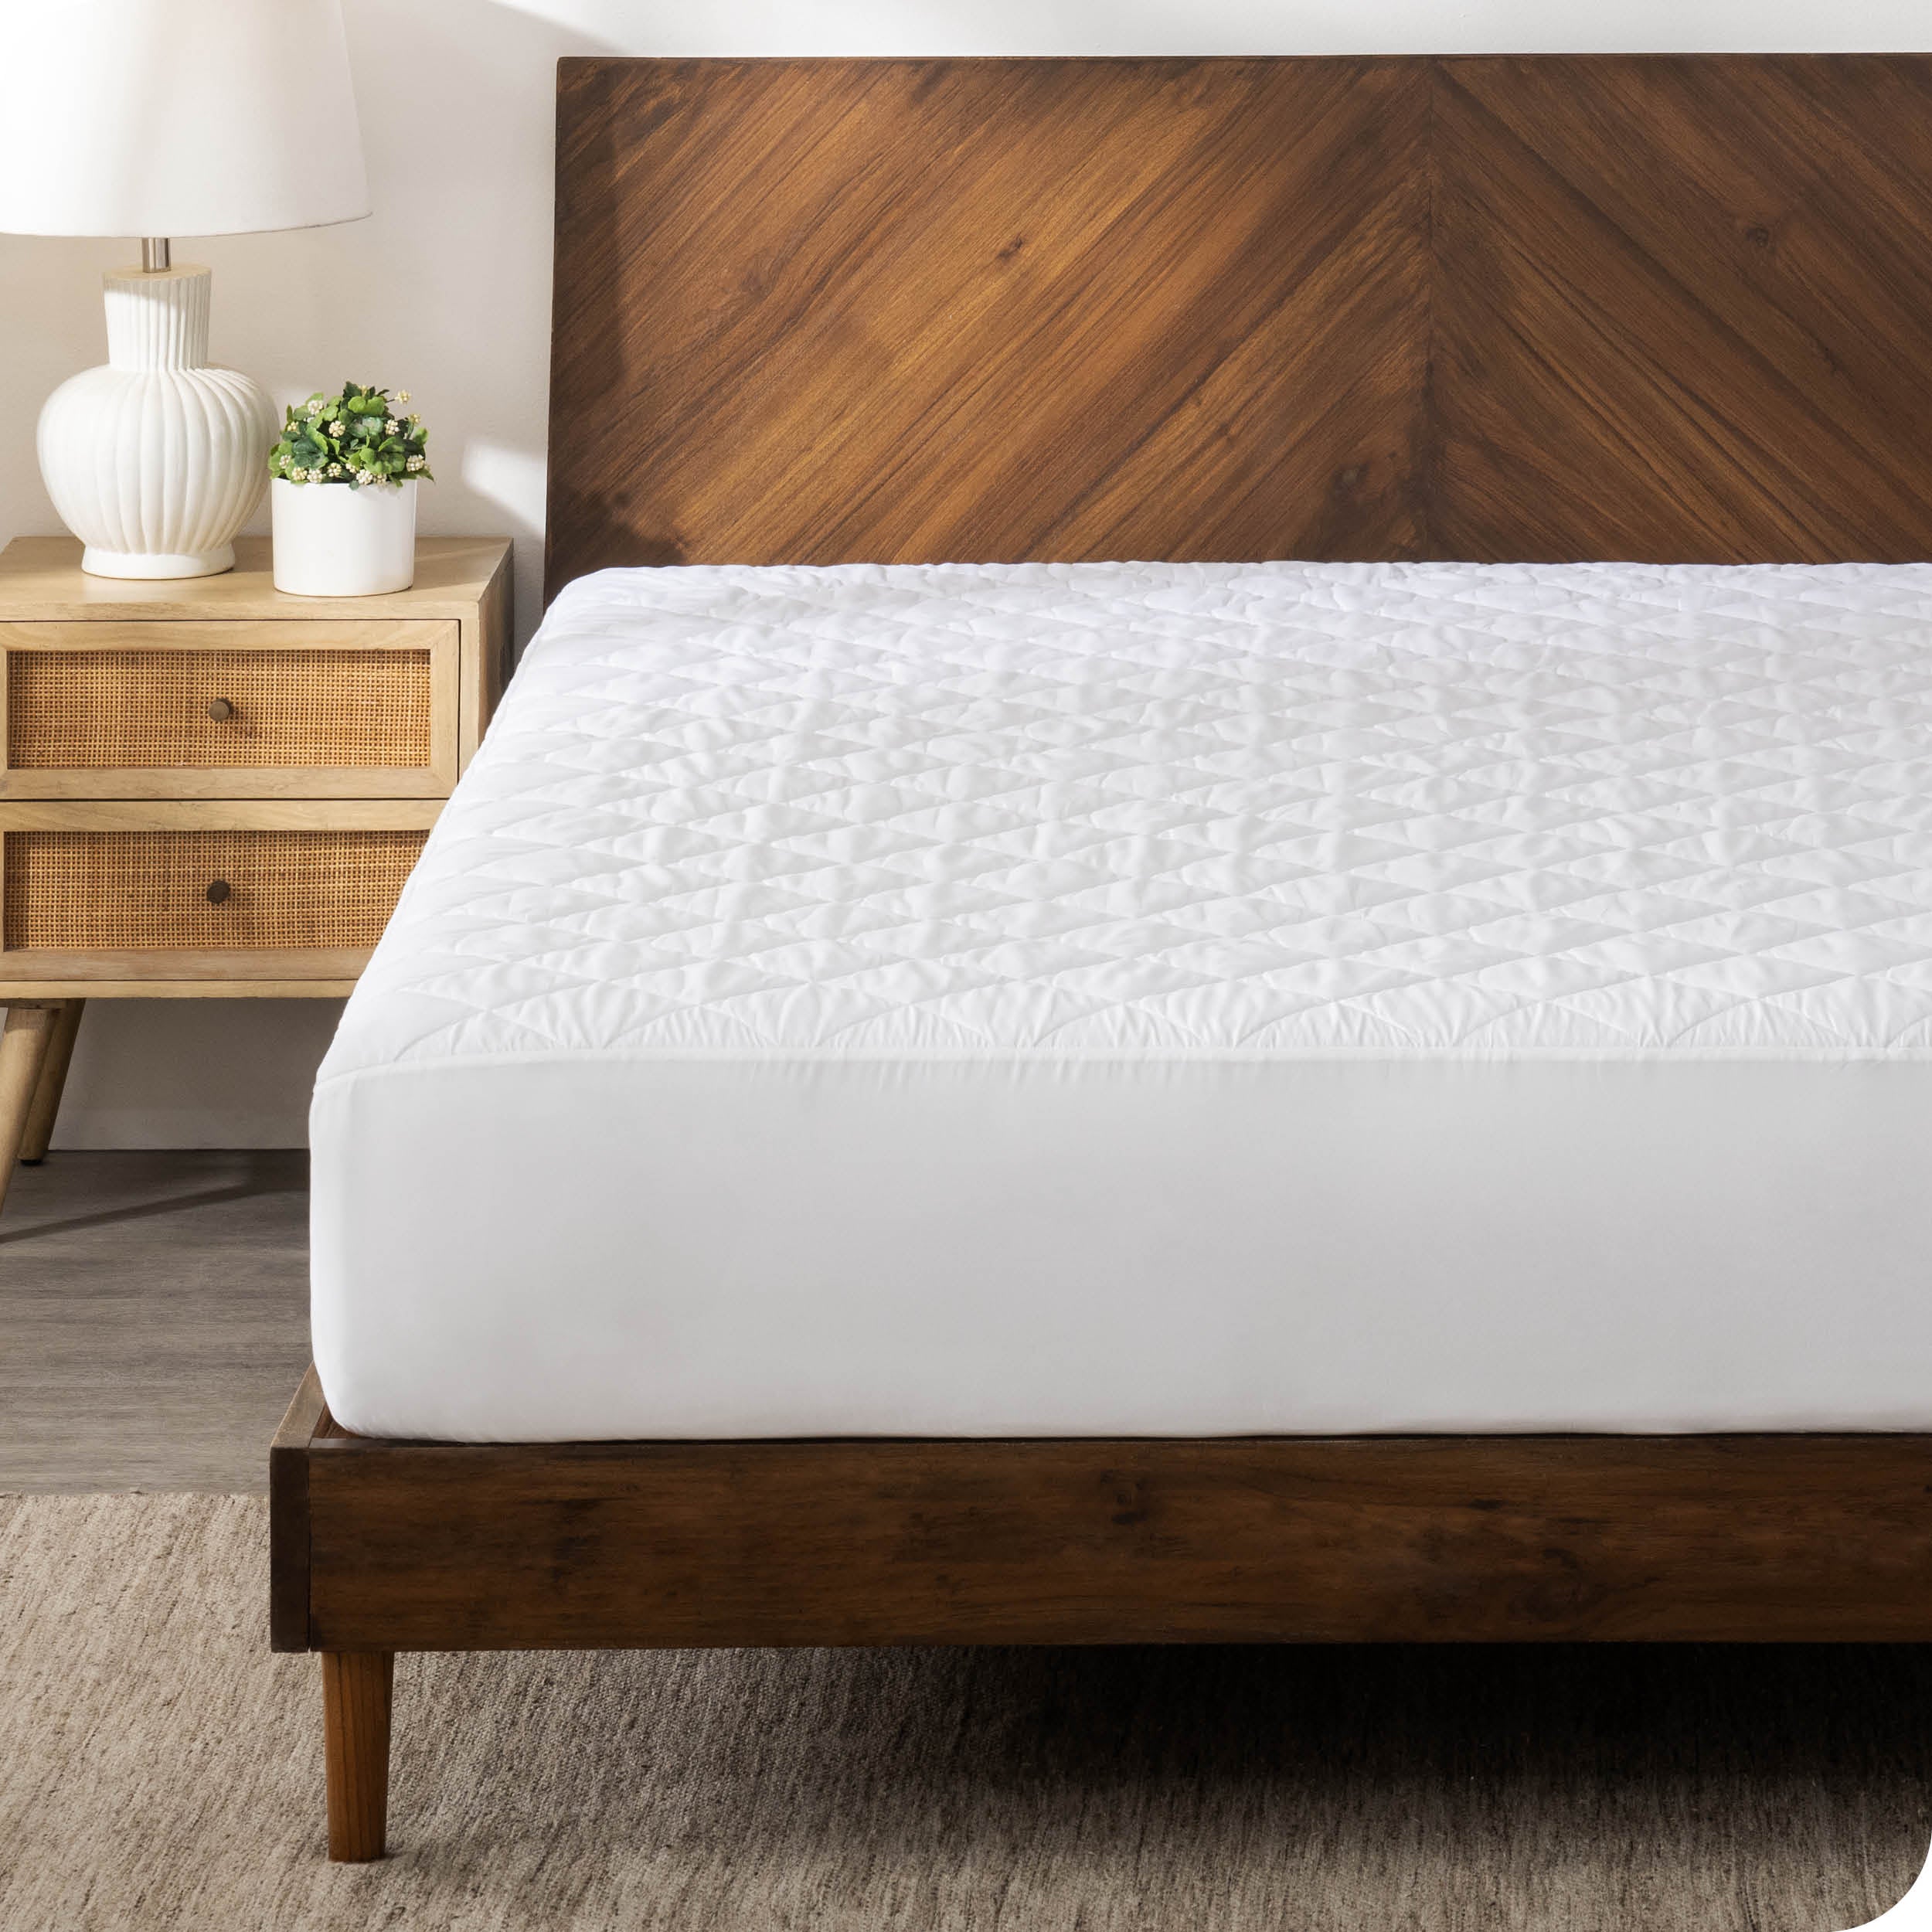 A mattress pad on a bed with a wooden bed frame